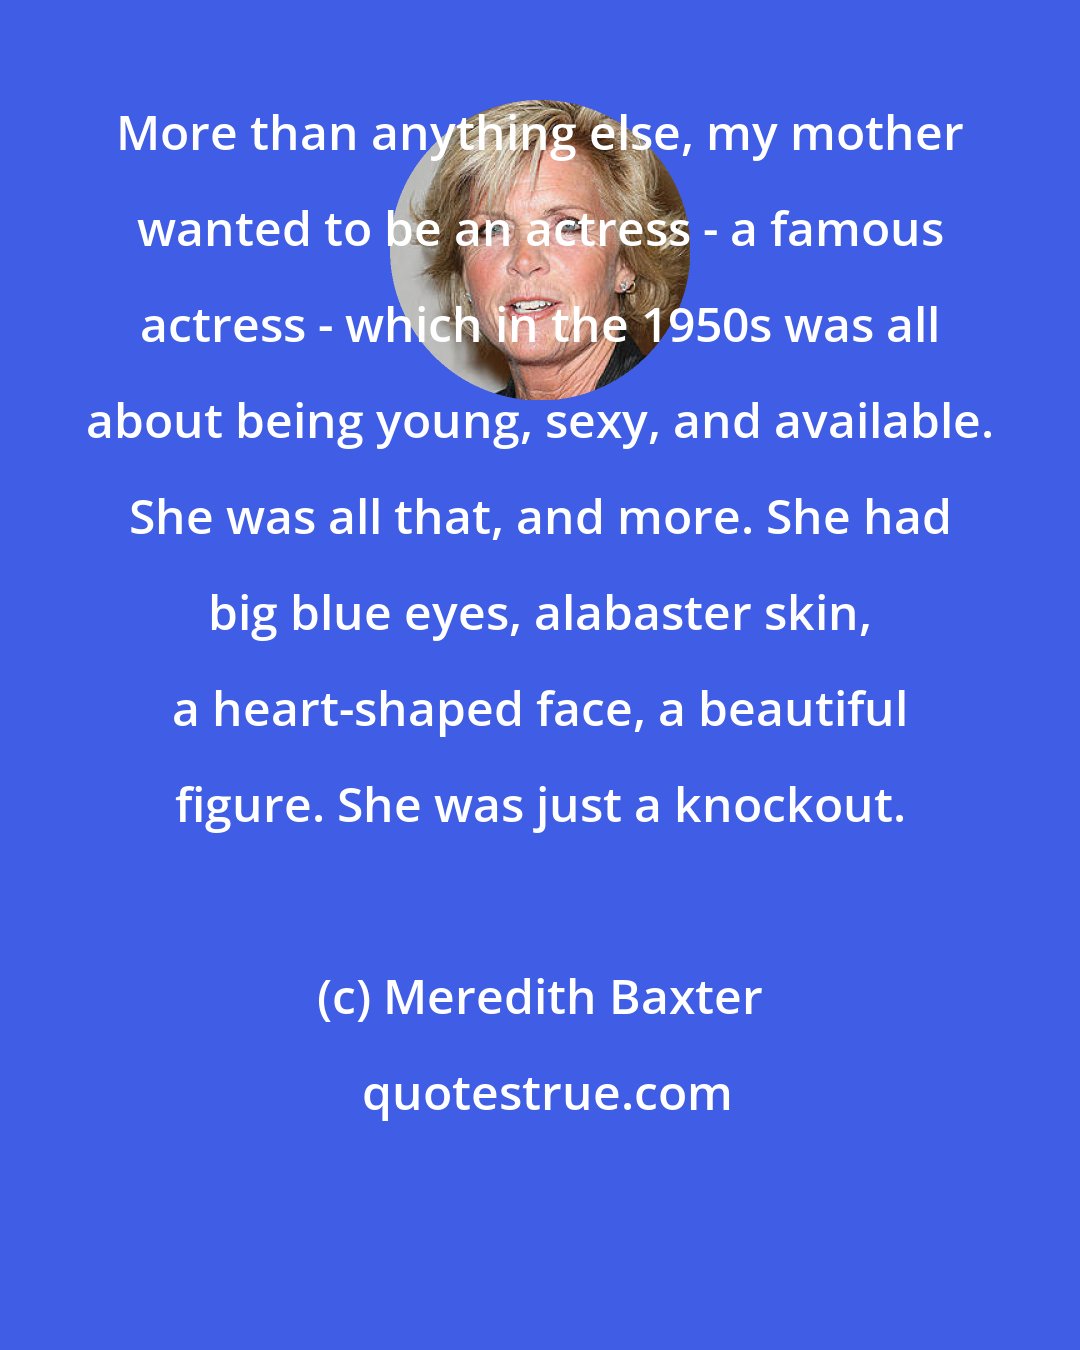 Meredith Baxter: More than anything else, my mother wanted to be an actress - a famous actress - which in the 1950s was all about being young, sexy, and available. She was all that, and more. She had big blue eyes, alabaster skin, a heart-shaped face, a beautiful figure. She was just a knockout.